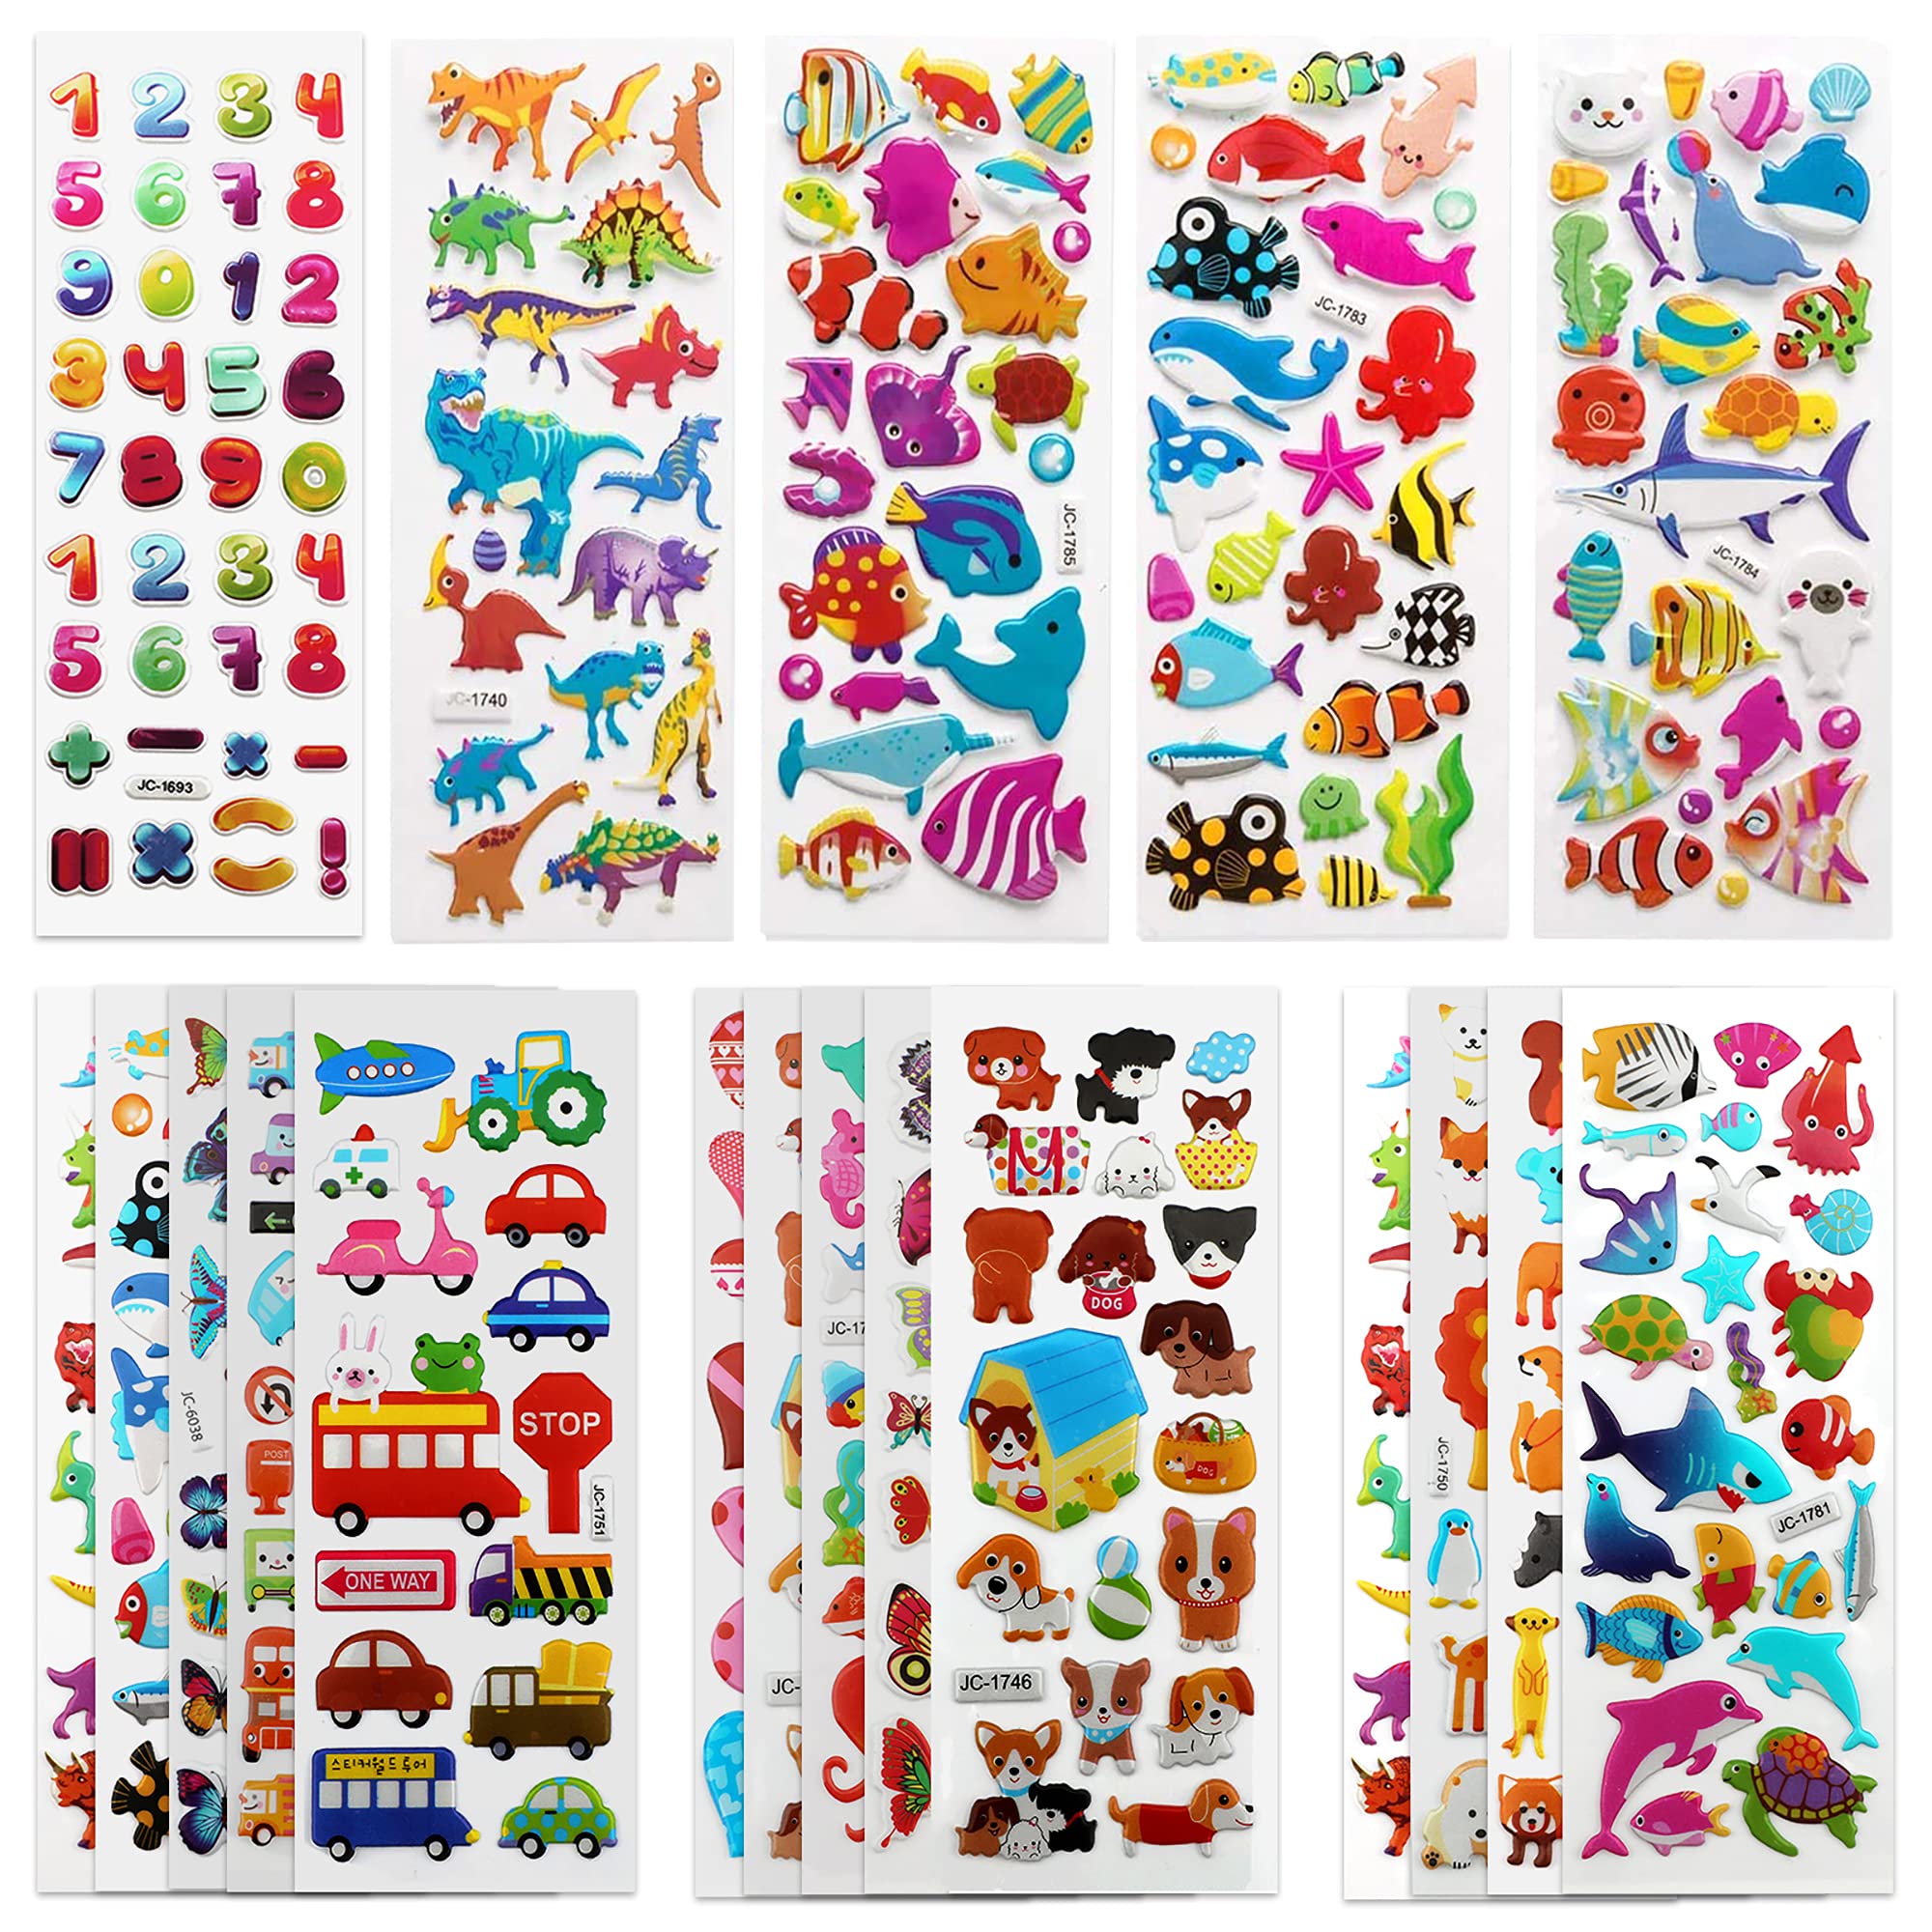 SAVITA 3D Stickers for Kids & Toddlers 500+ Puffy Stickers Variety Pack for Scrapbooking Bullet Journal Including Animal, Numbers, Fruits, Fish, Dinosaurs, Cars and More…